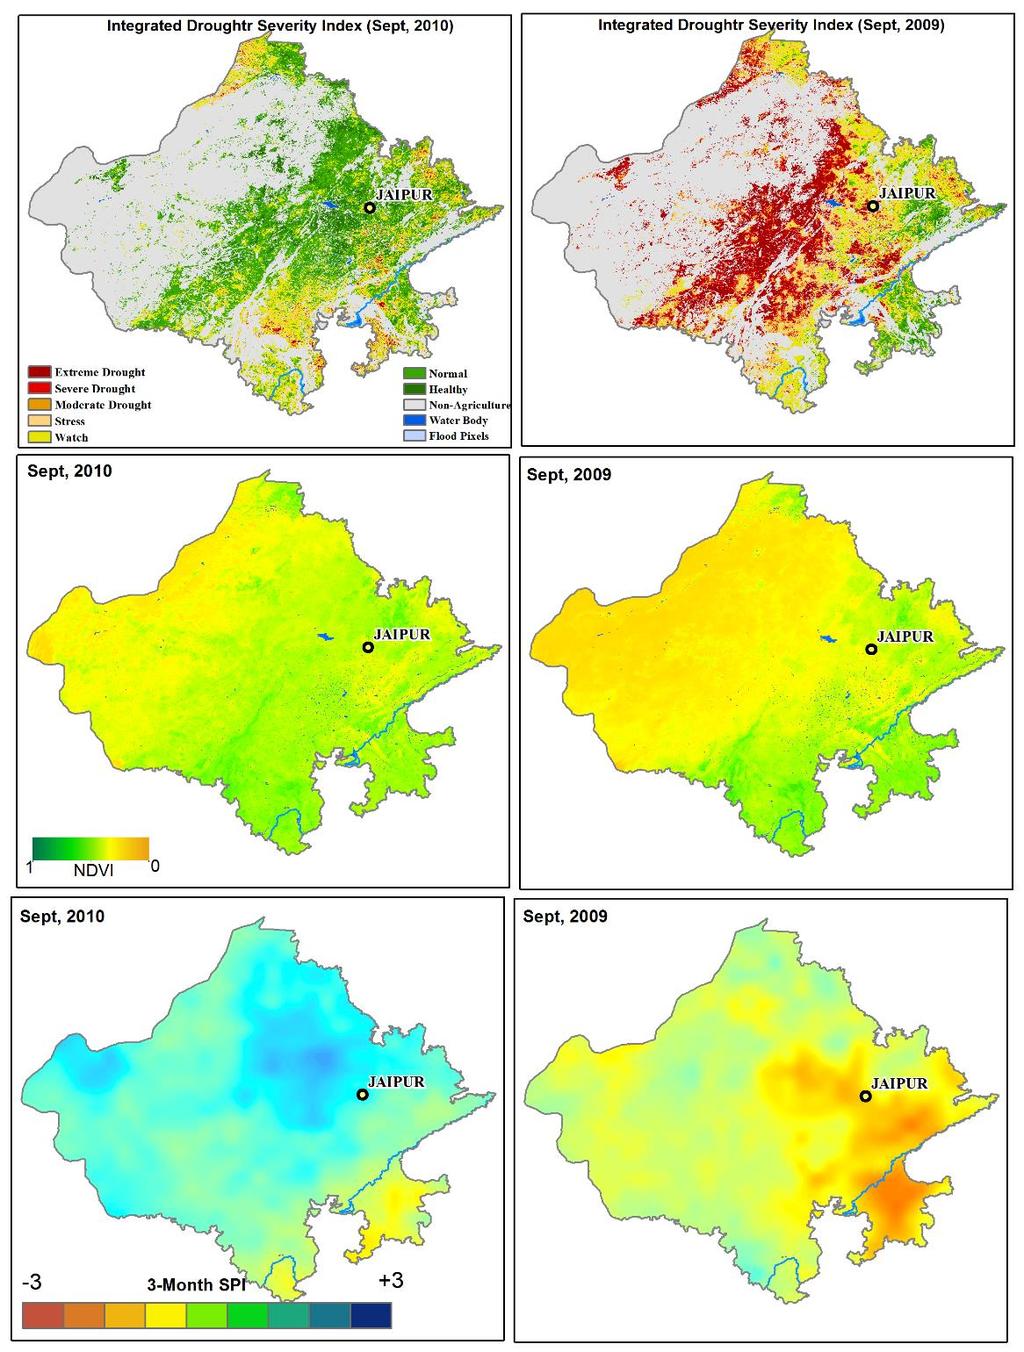 VCI, PCI and Drought Indices for drought year (2009) and normal year (2010), Rajasthan Long term NDVI